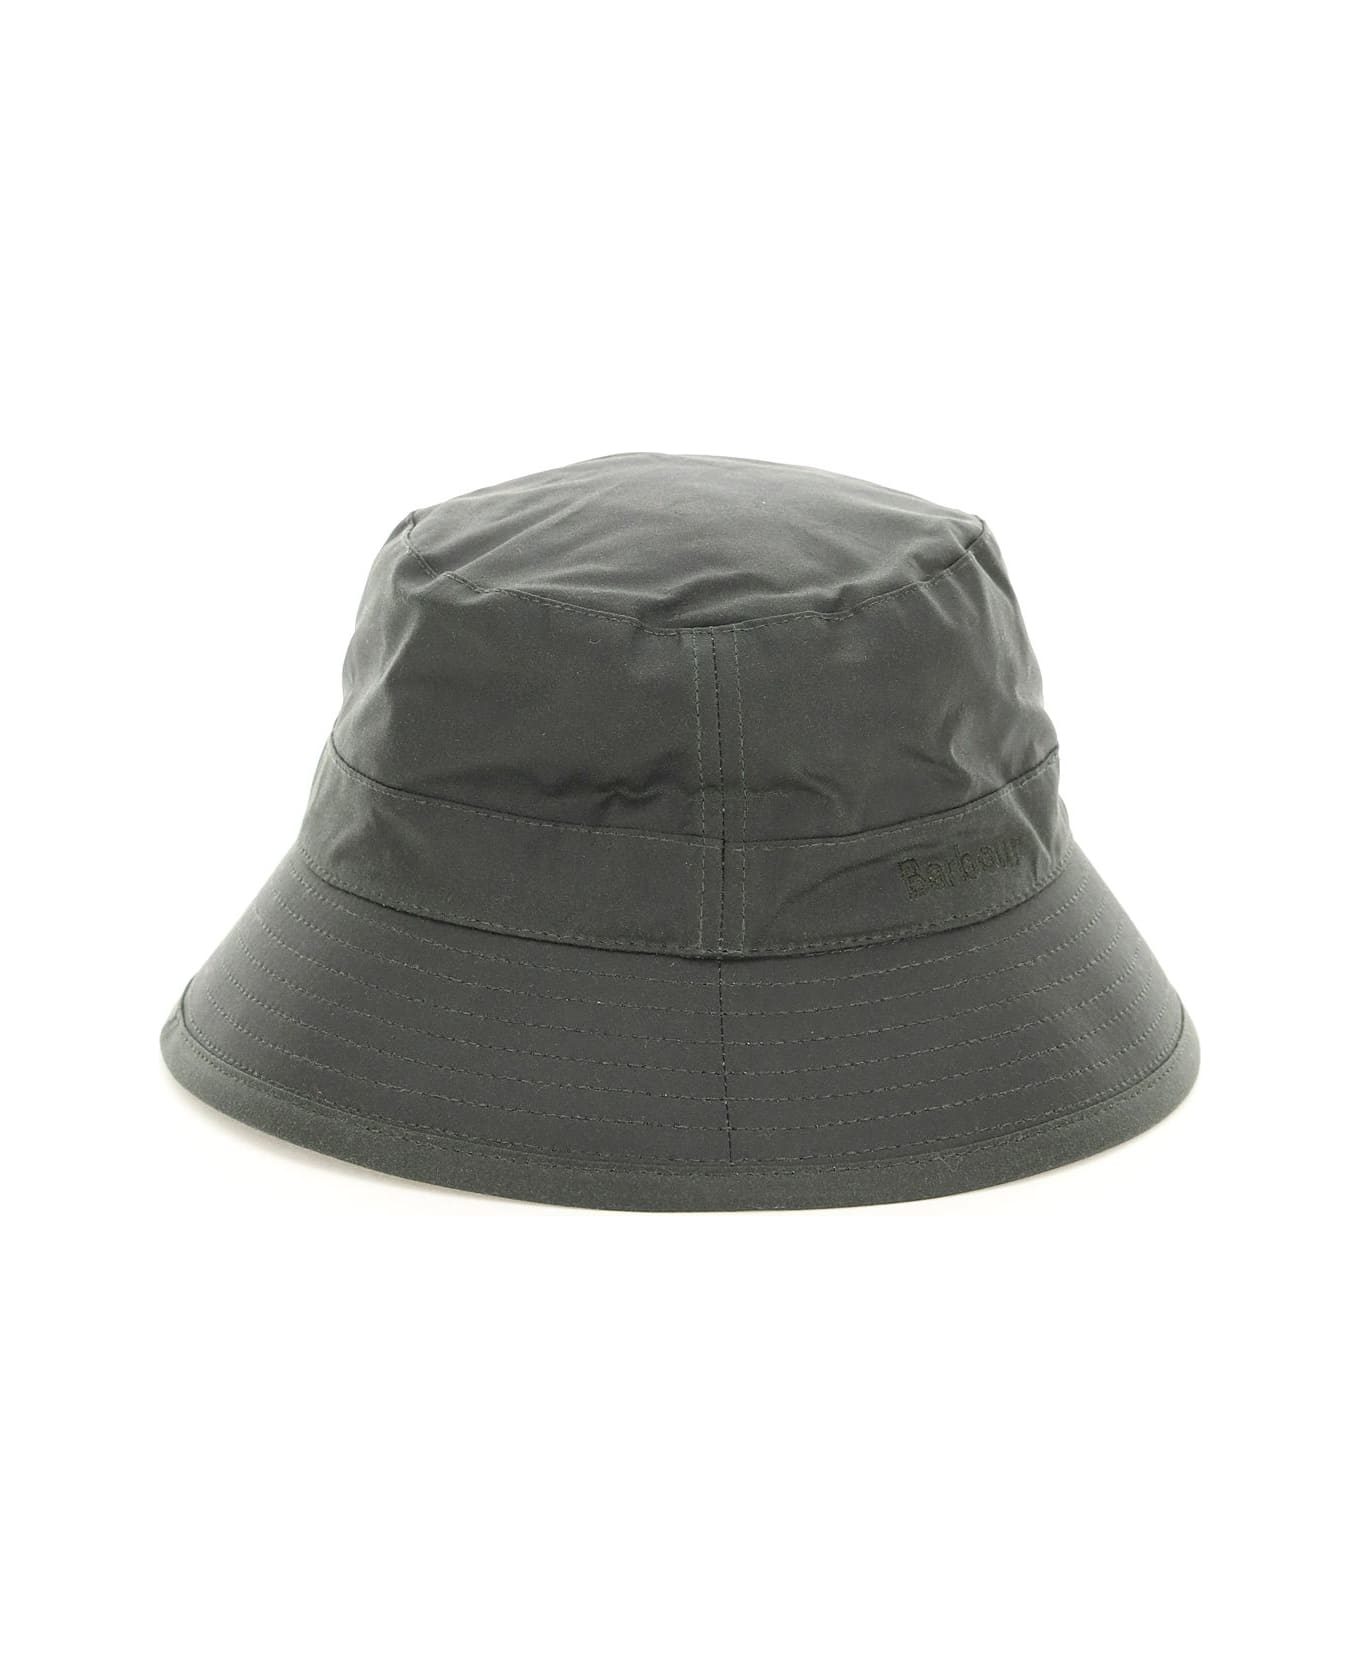 Barbour Waxed Bucket Hat - SAGE (Green) コート